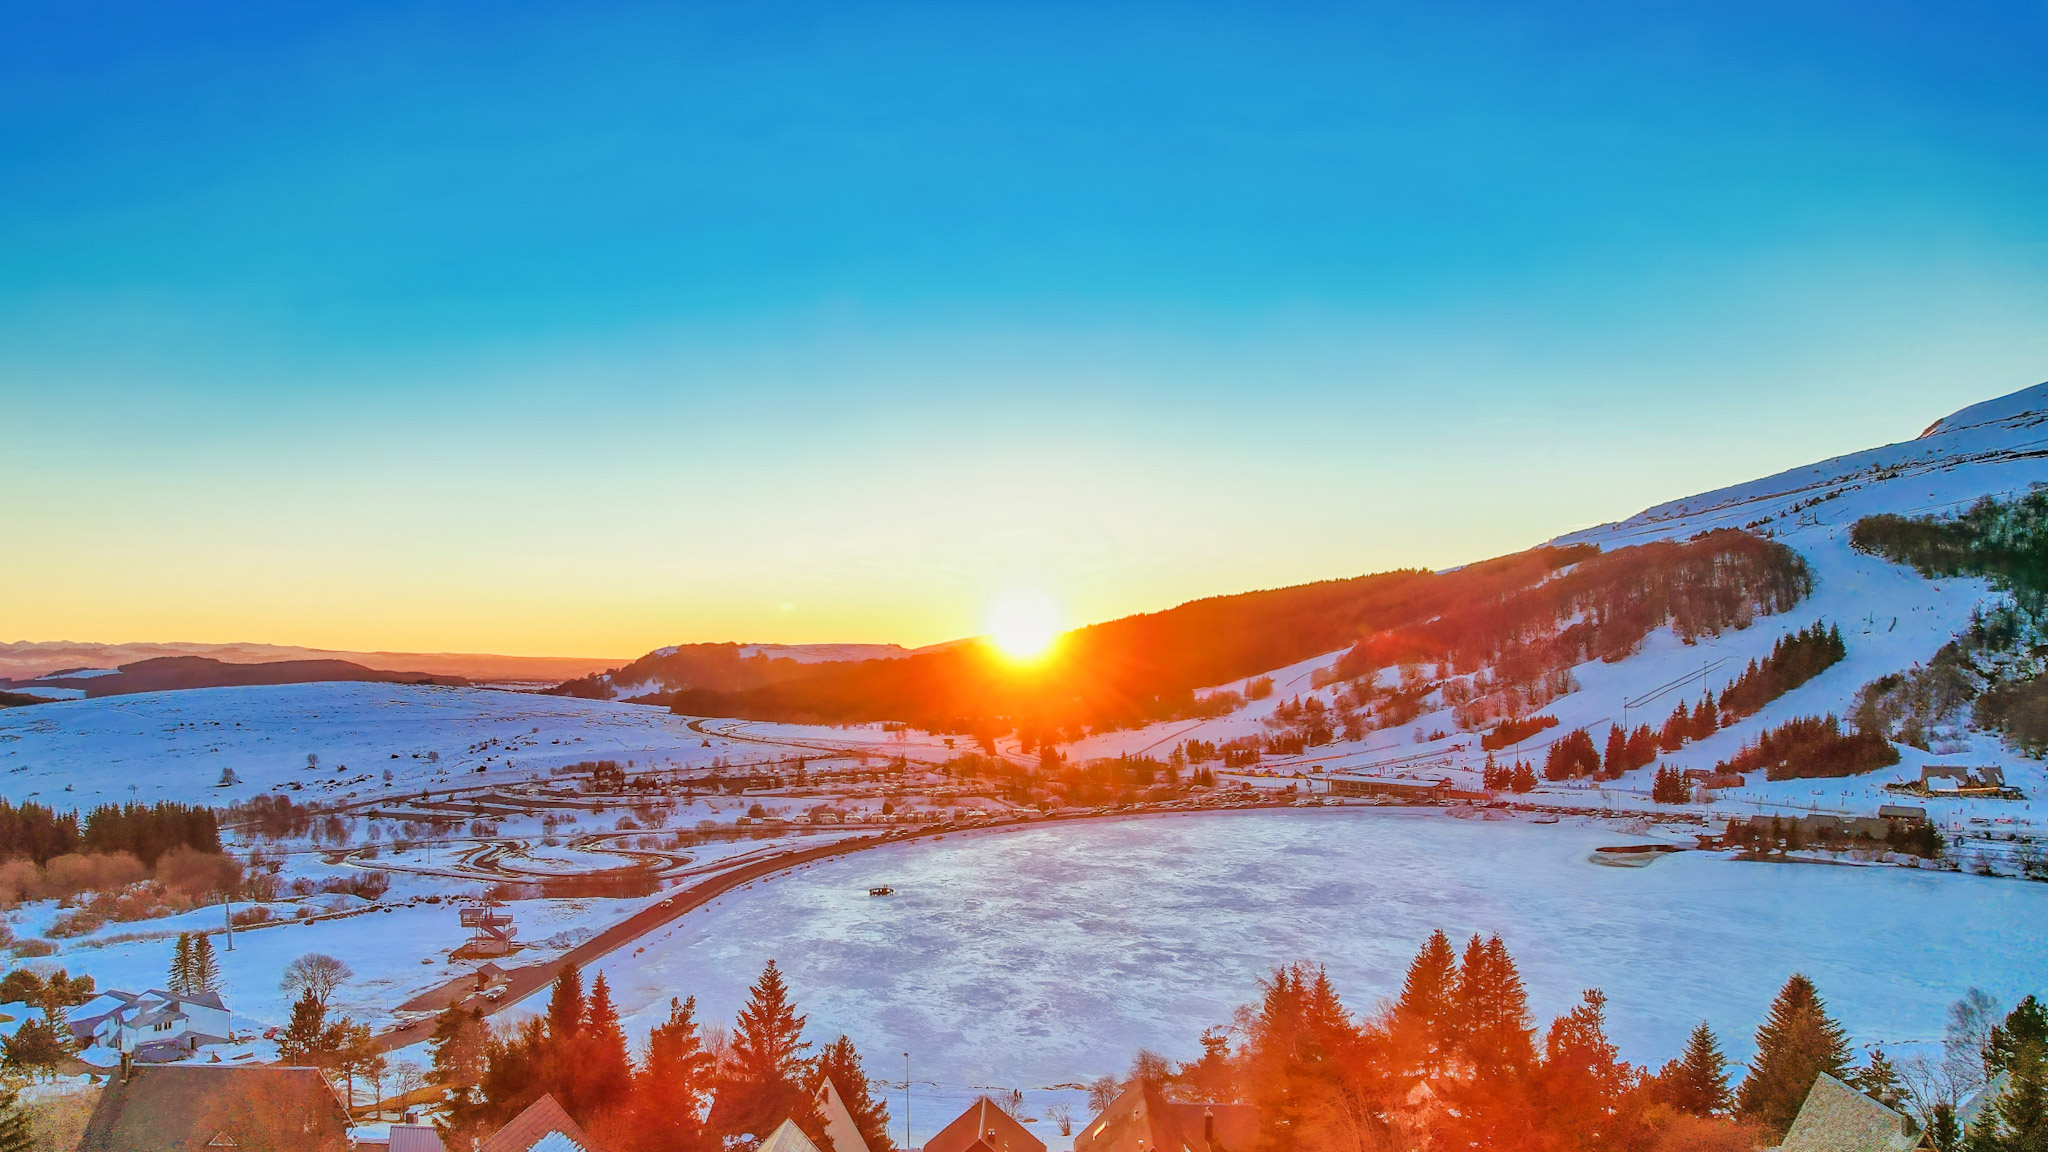 Sunset over Super Besse and the frozen Lac des Hermines